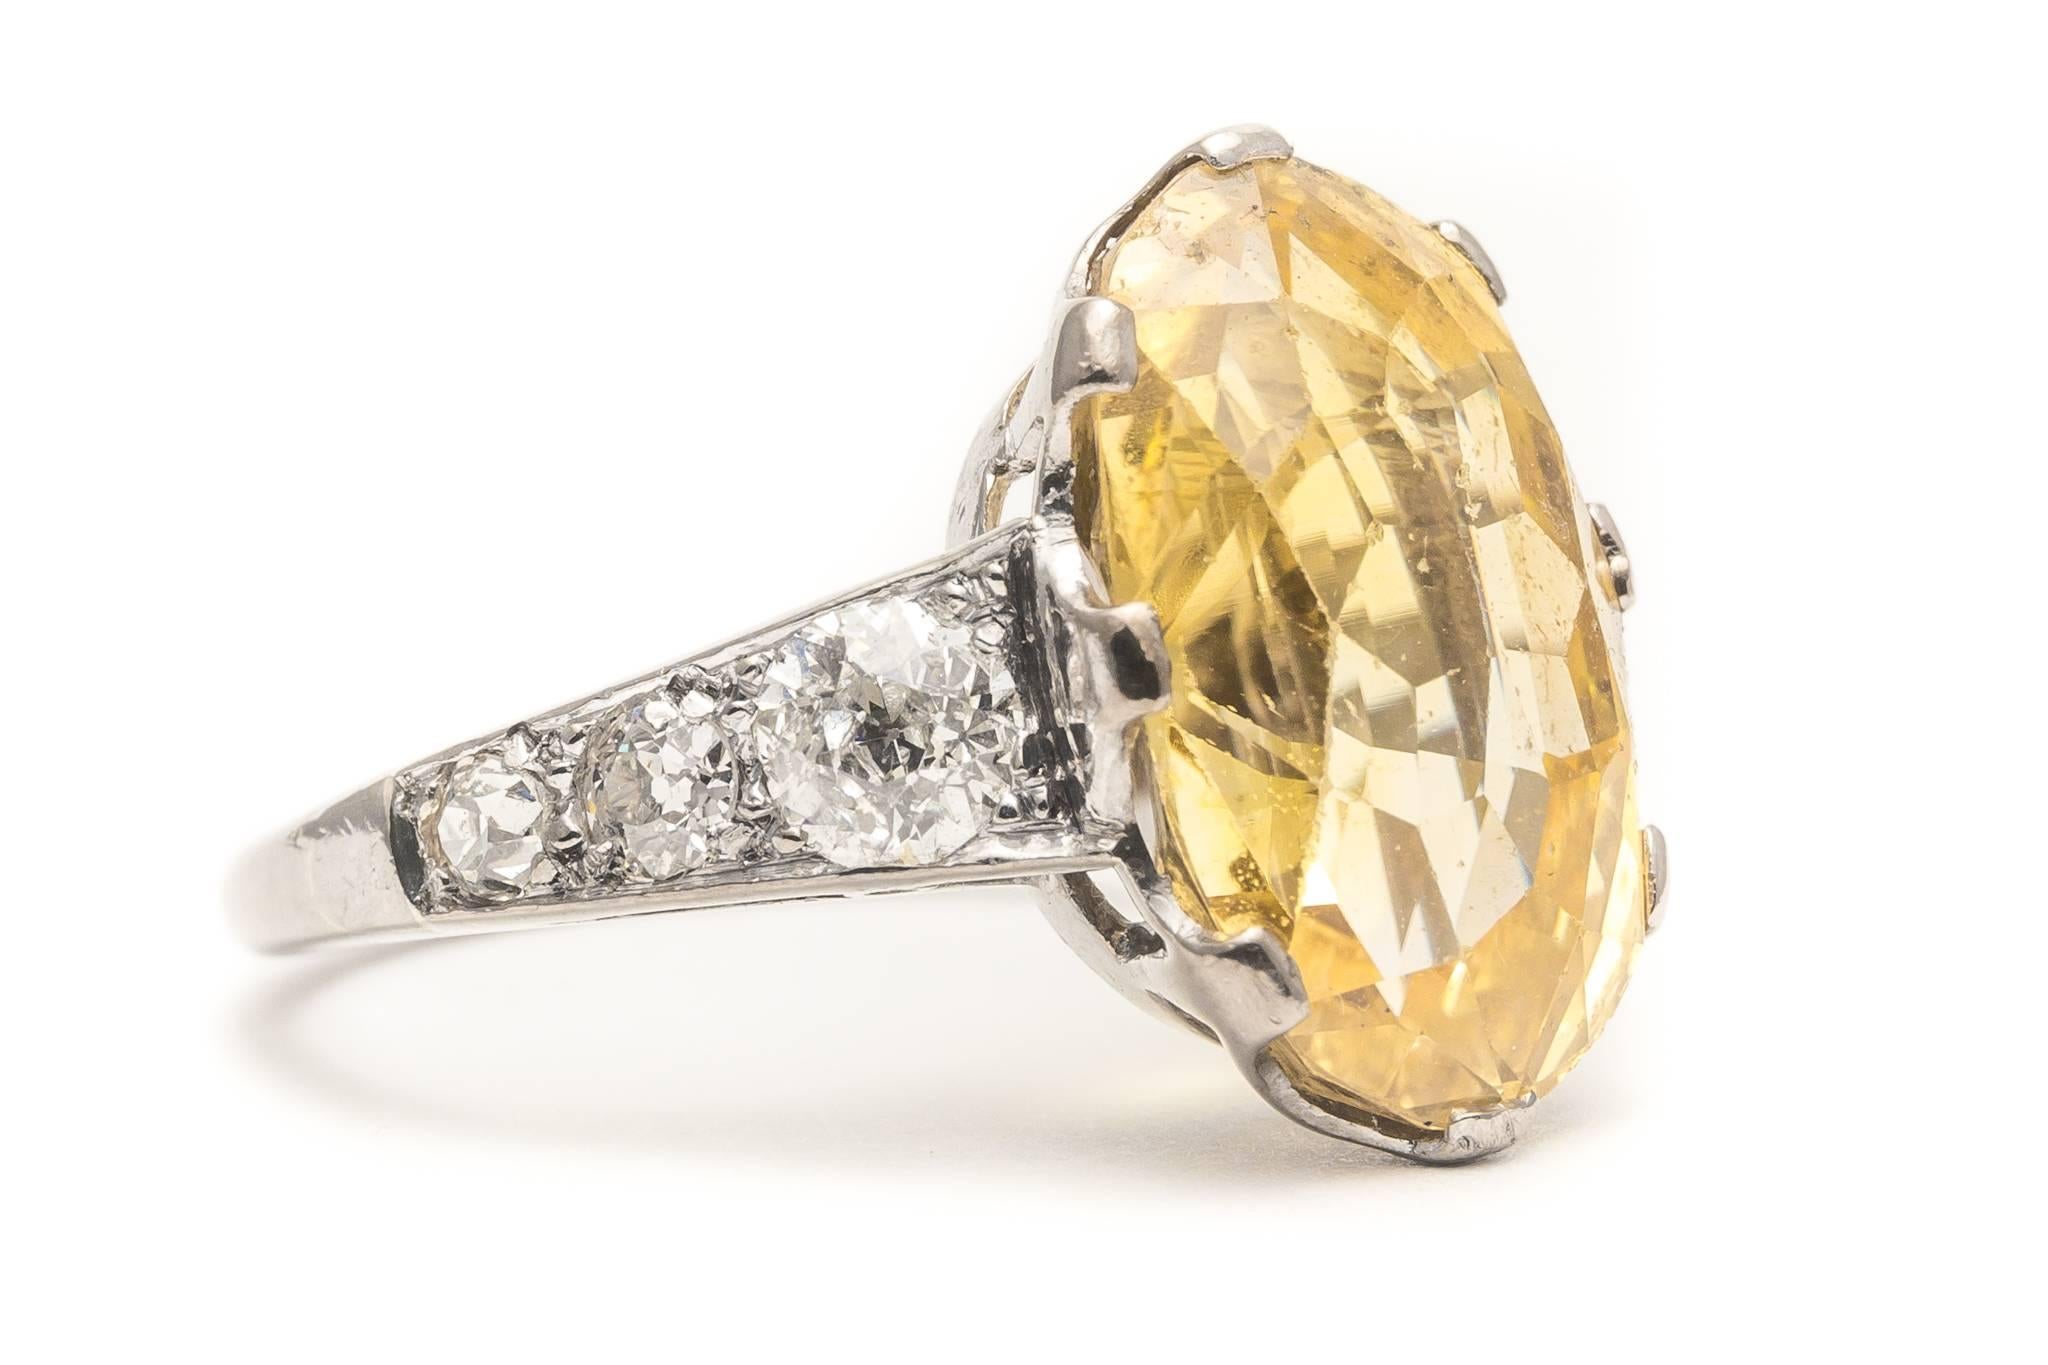 Beacon Hill Jewelers Presents:

A beautiful original edwardian period yellow sapphire and diamond ring in platinum.  Of beautiful rich vivid lemon yellow color, the high quality antique cut yellow sapphire sits framed by a total of six high quality